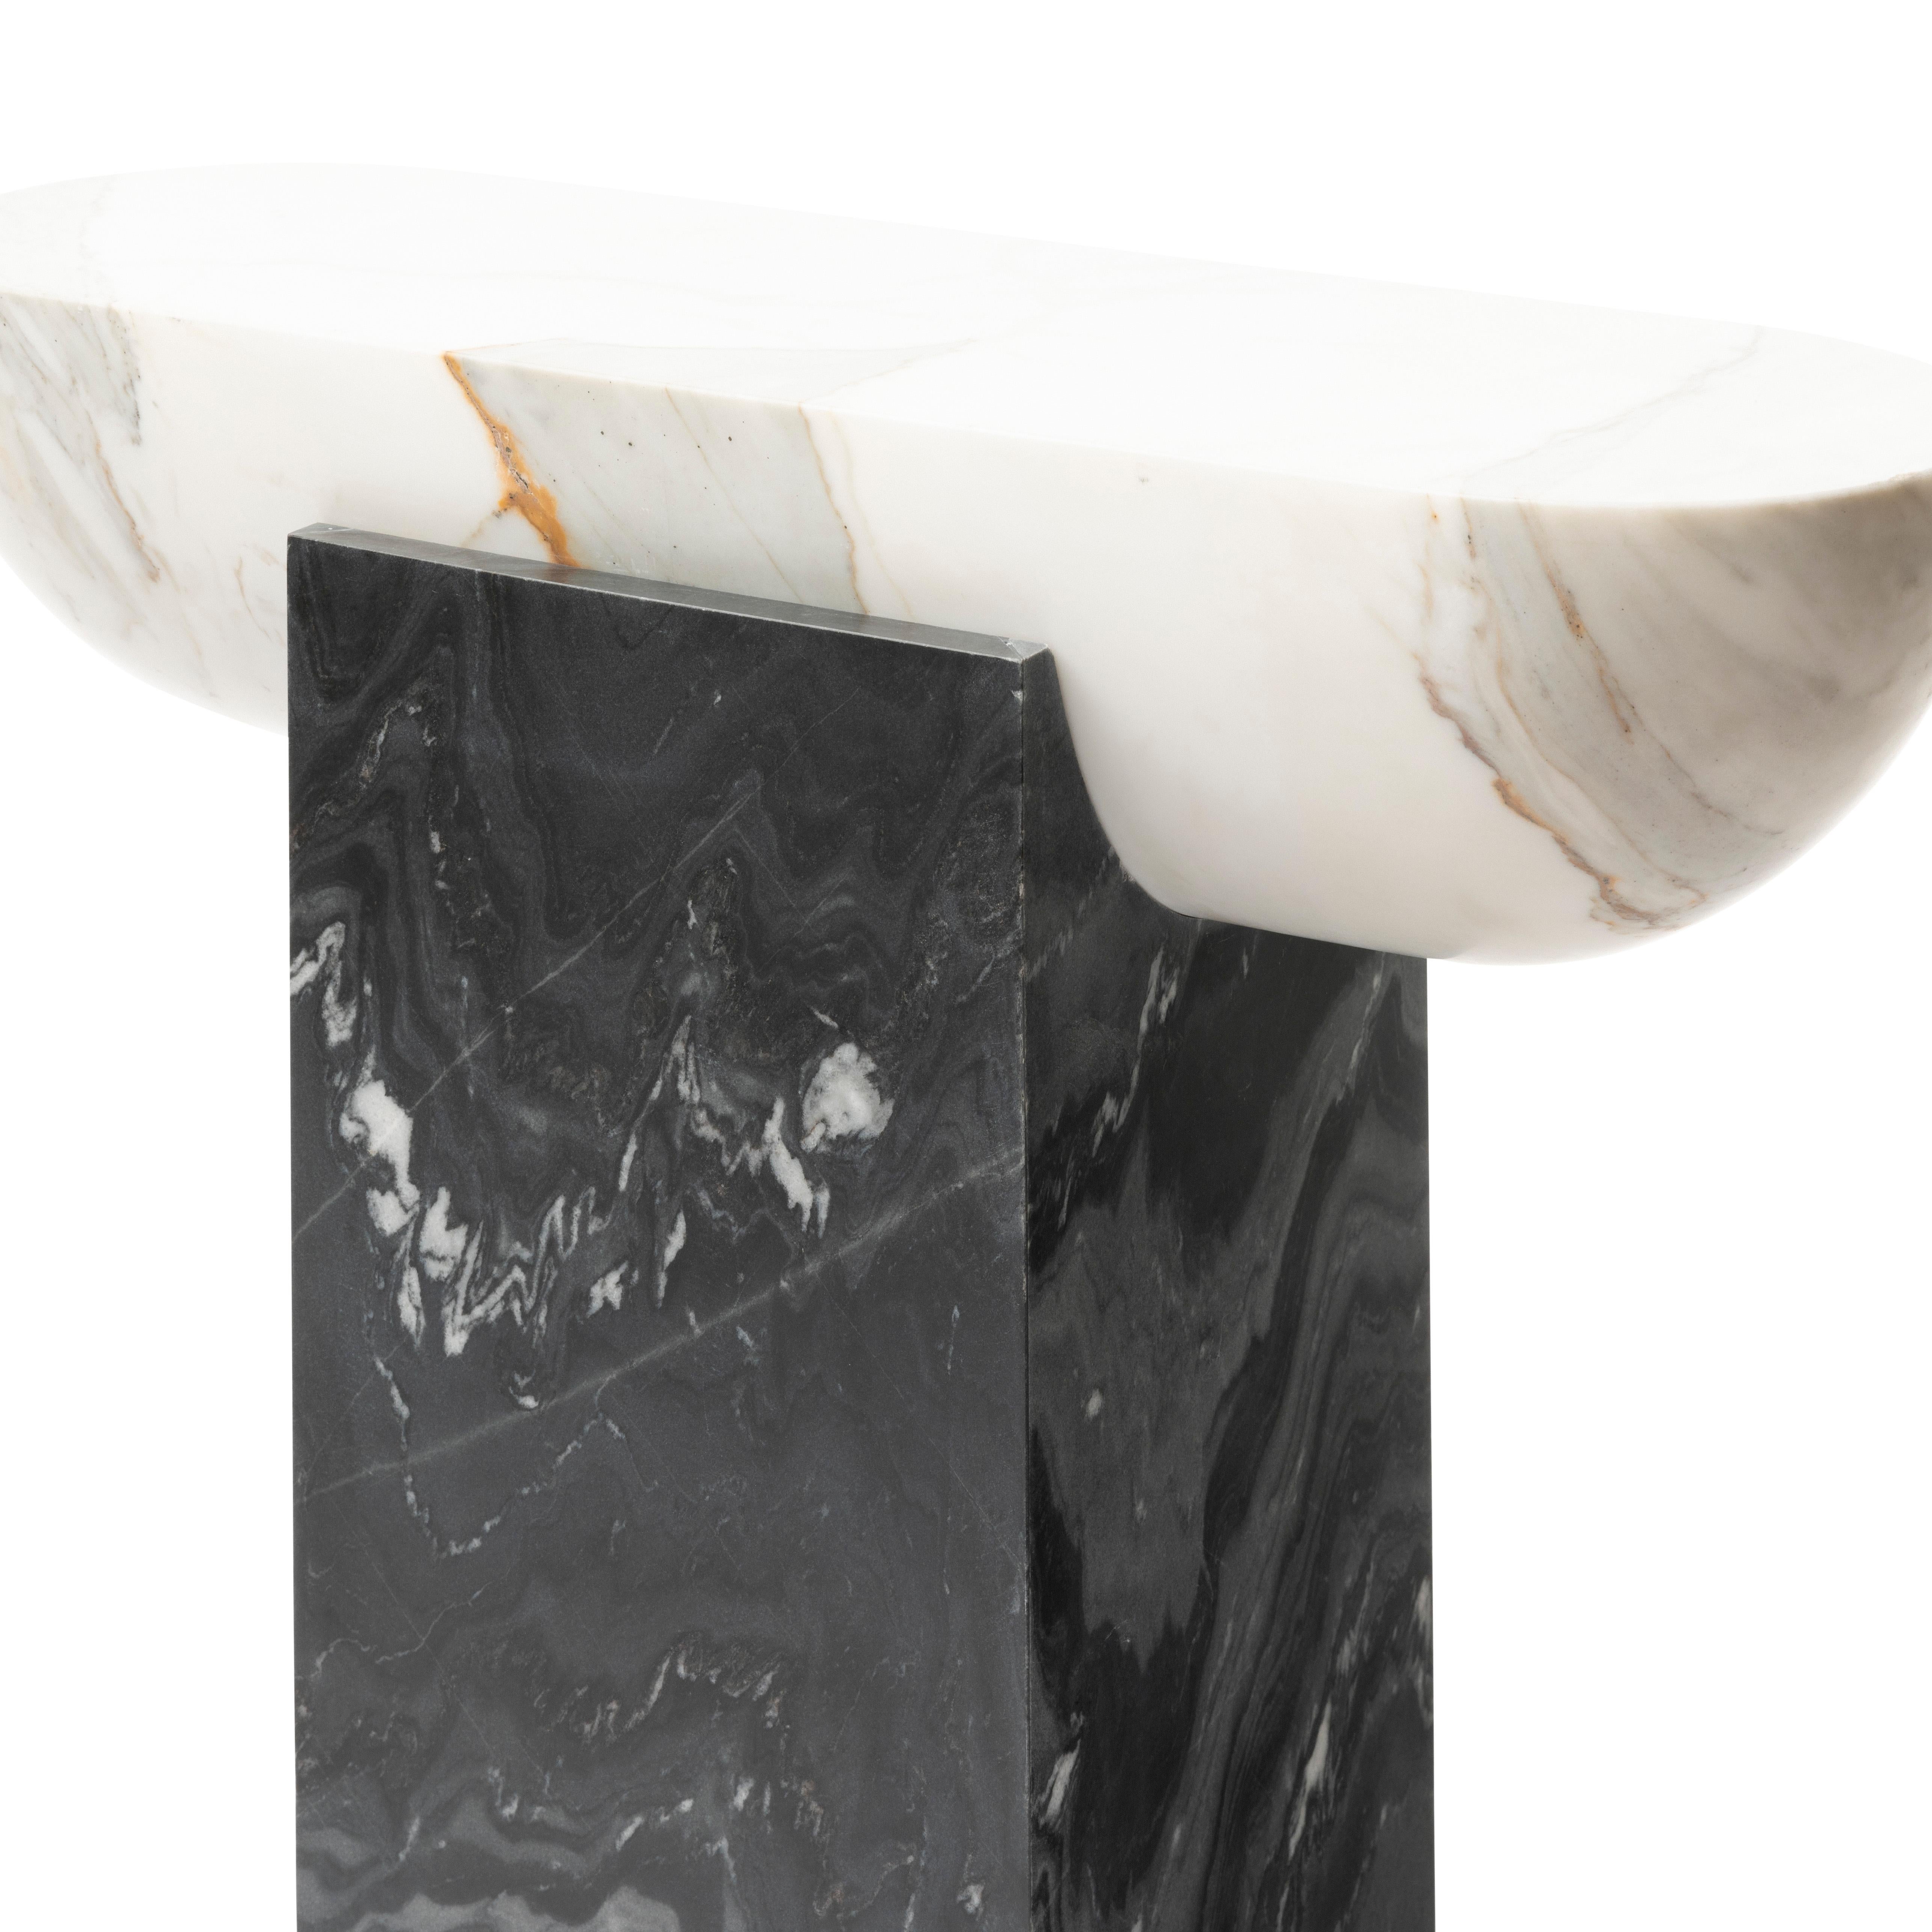 Honed Italian Calacatta marble cupped by a Nero Colonnata plinth; the PILL’S charm is in the justice of its proportions, and the vibrations of its materials.  Intentionally slender, the PILL's silhouette allows it to make a statement in the